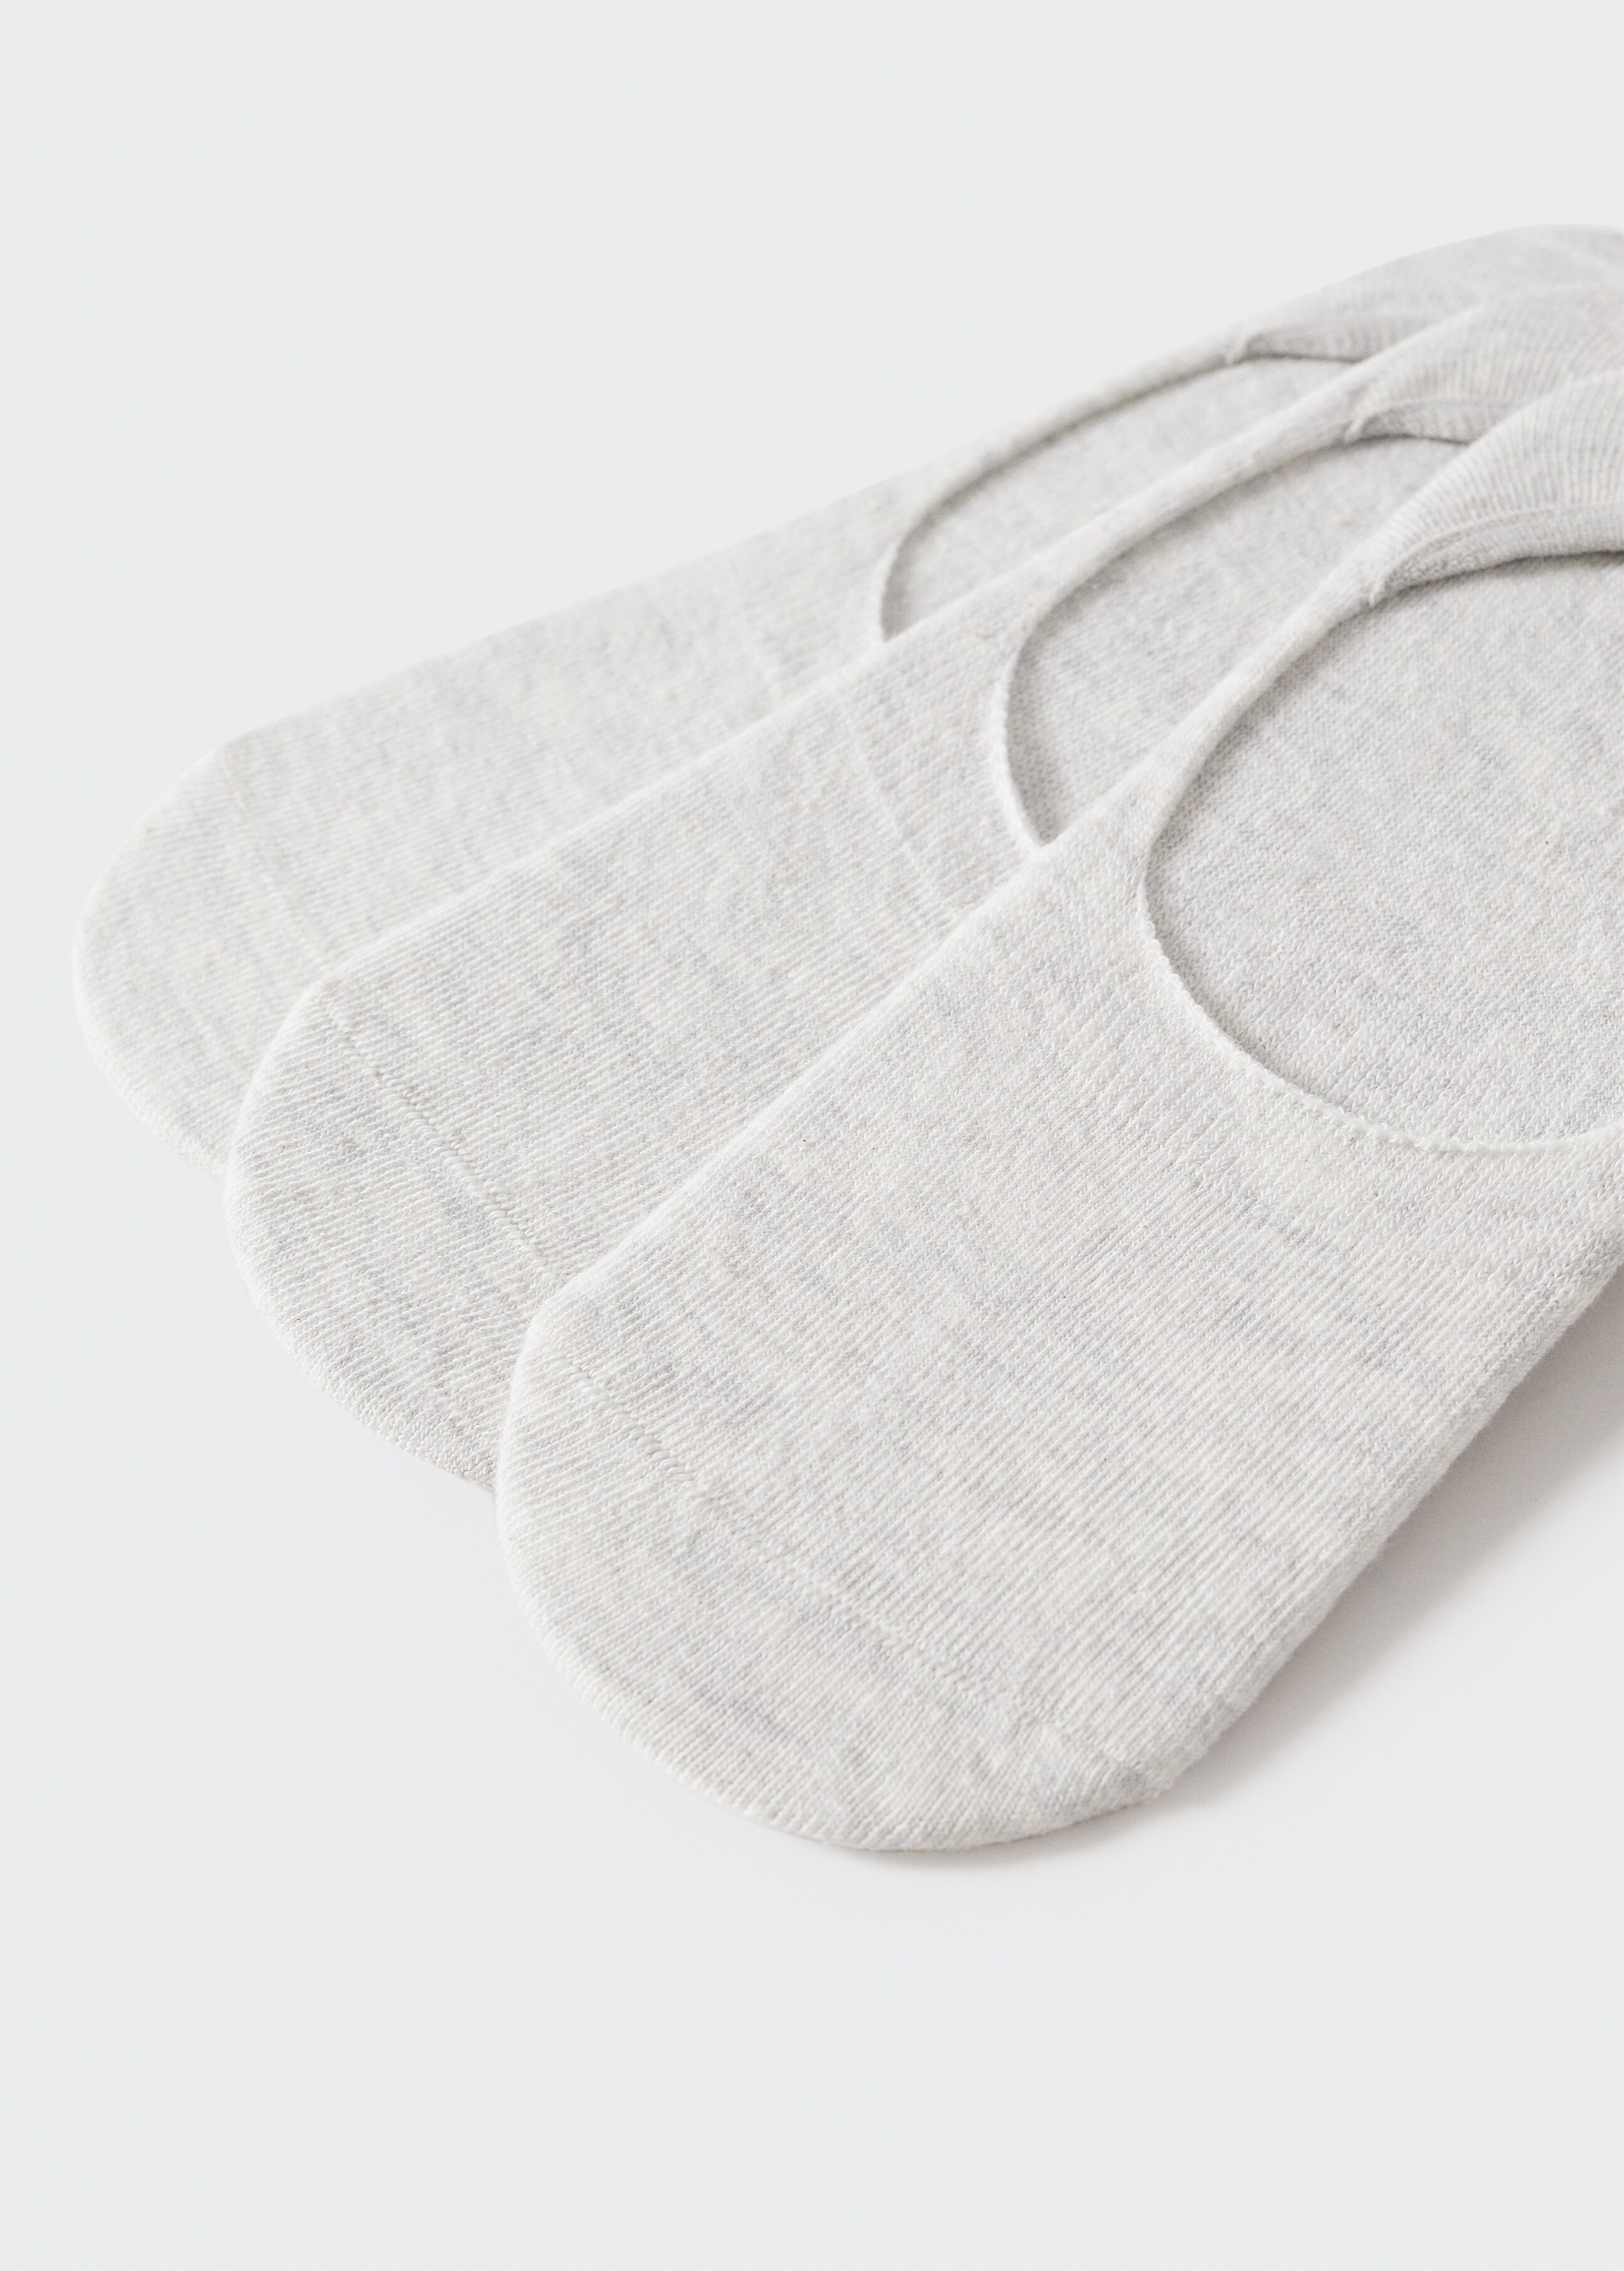 Invisible socks pack - Details of the article 8